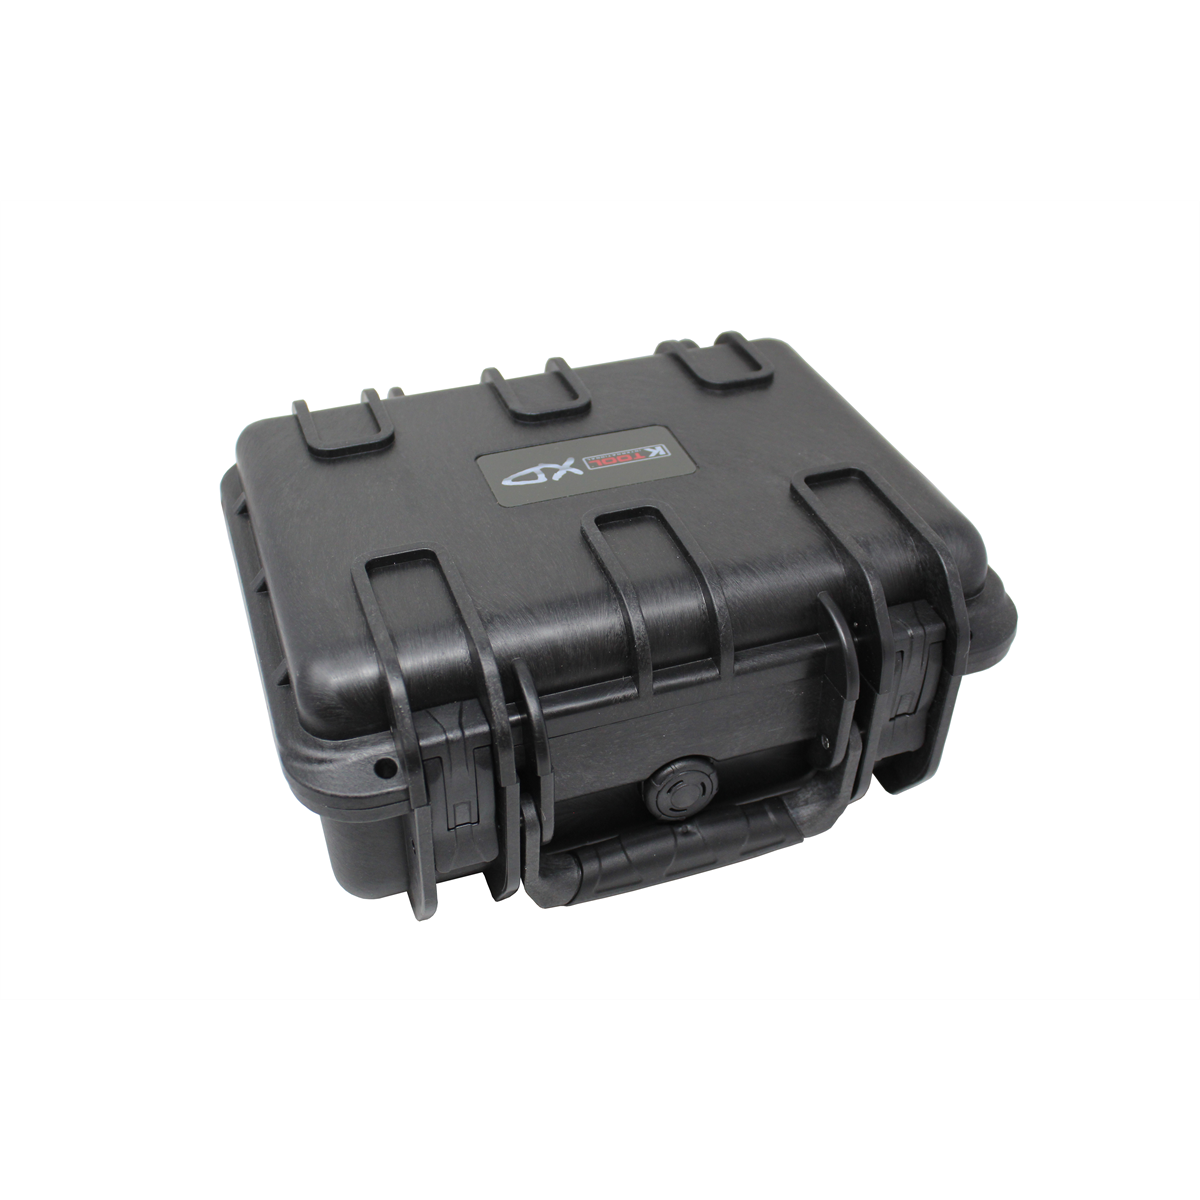 Picture of K Tool International KTIXD21170 7.99 x 4.53 x 10.94 & 10.6 x 5.79 x 12 in. Weatherproof Protective Case